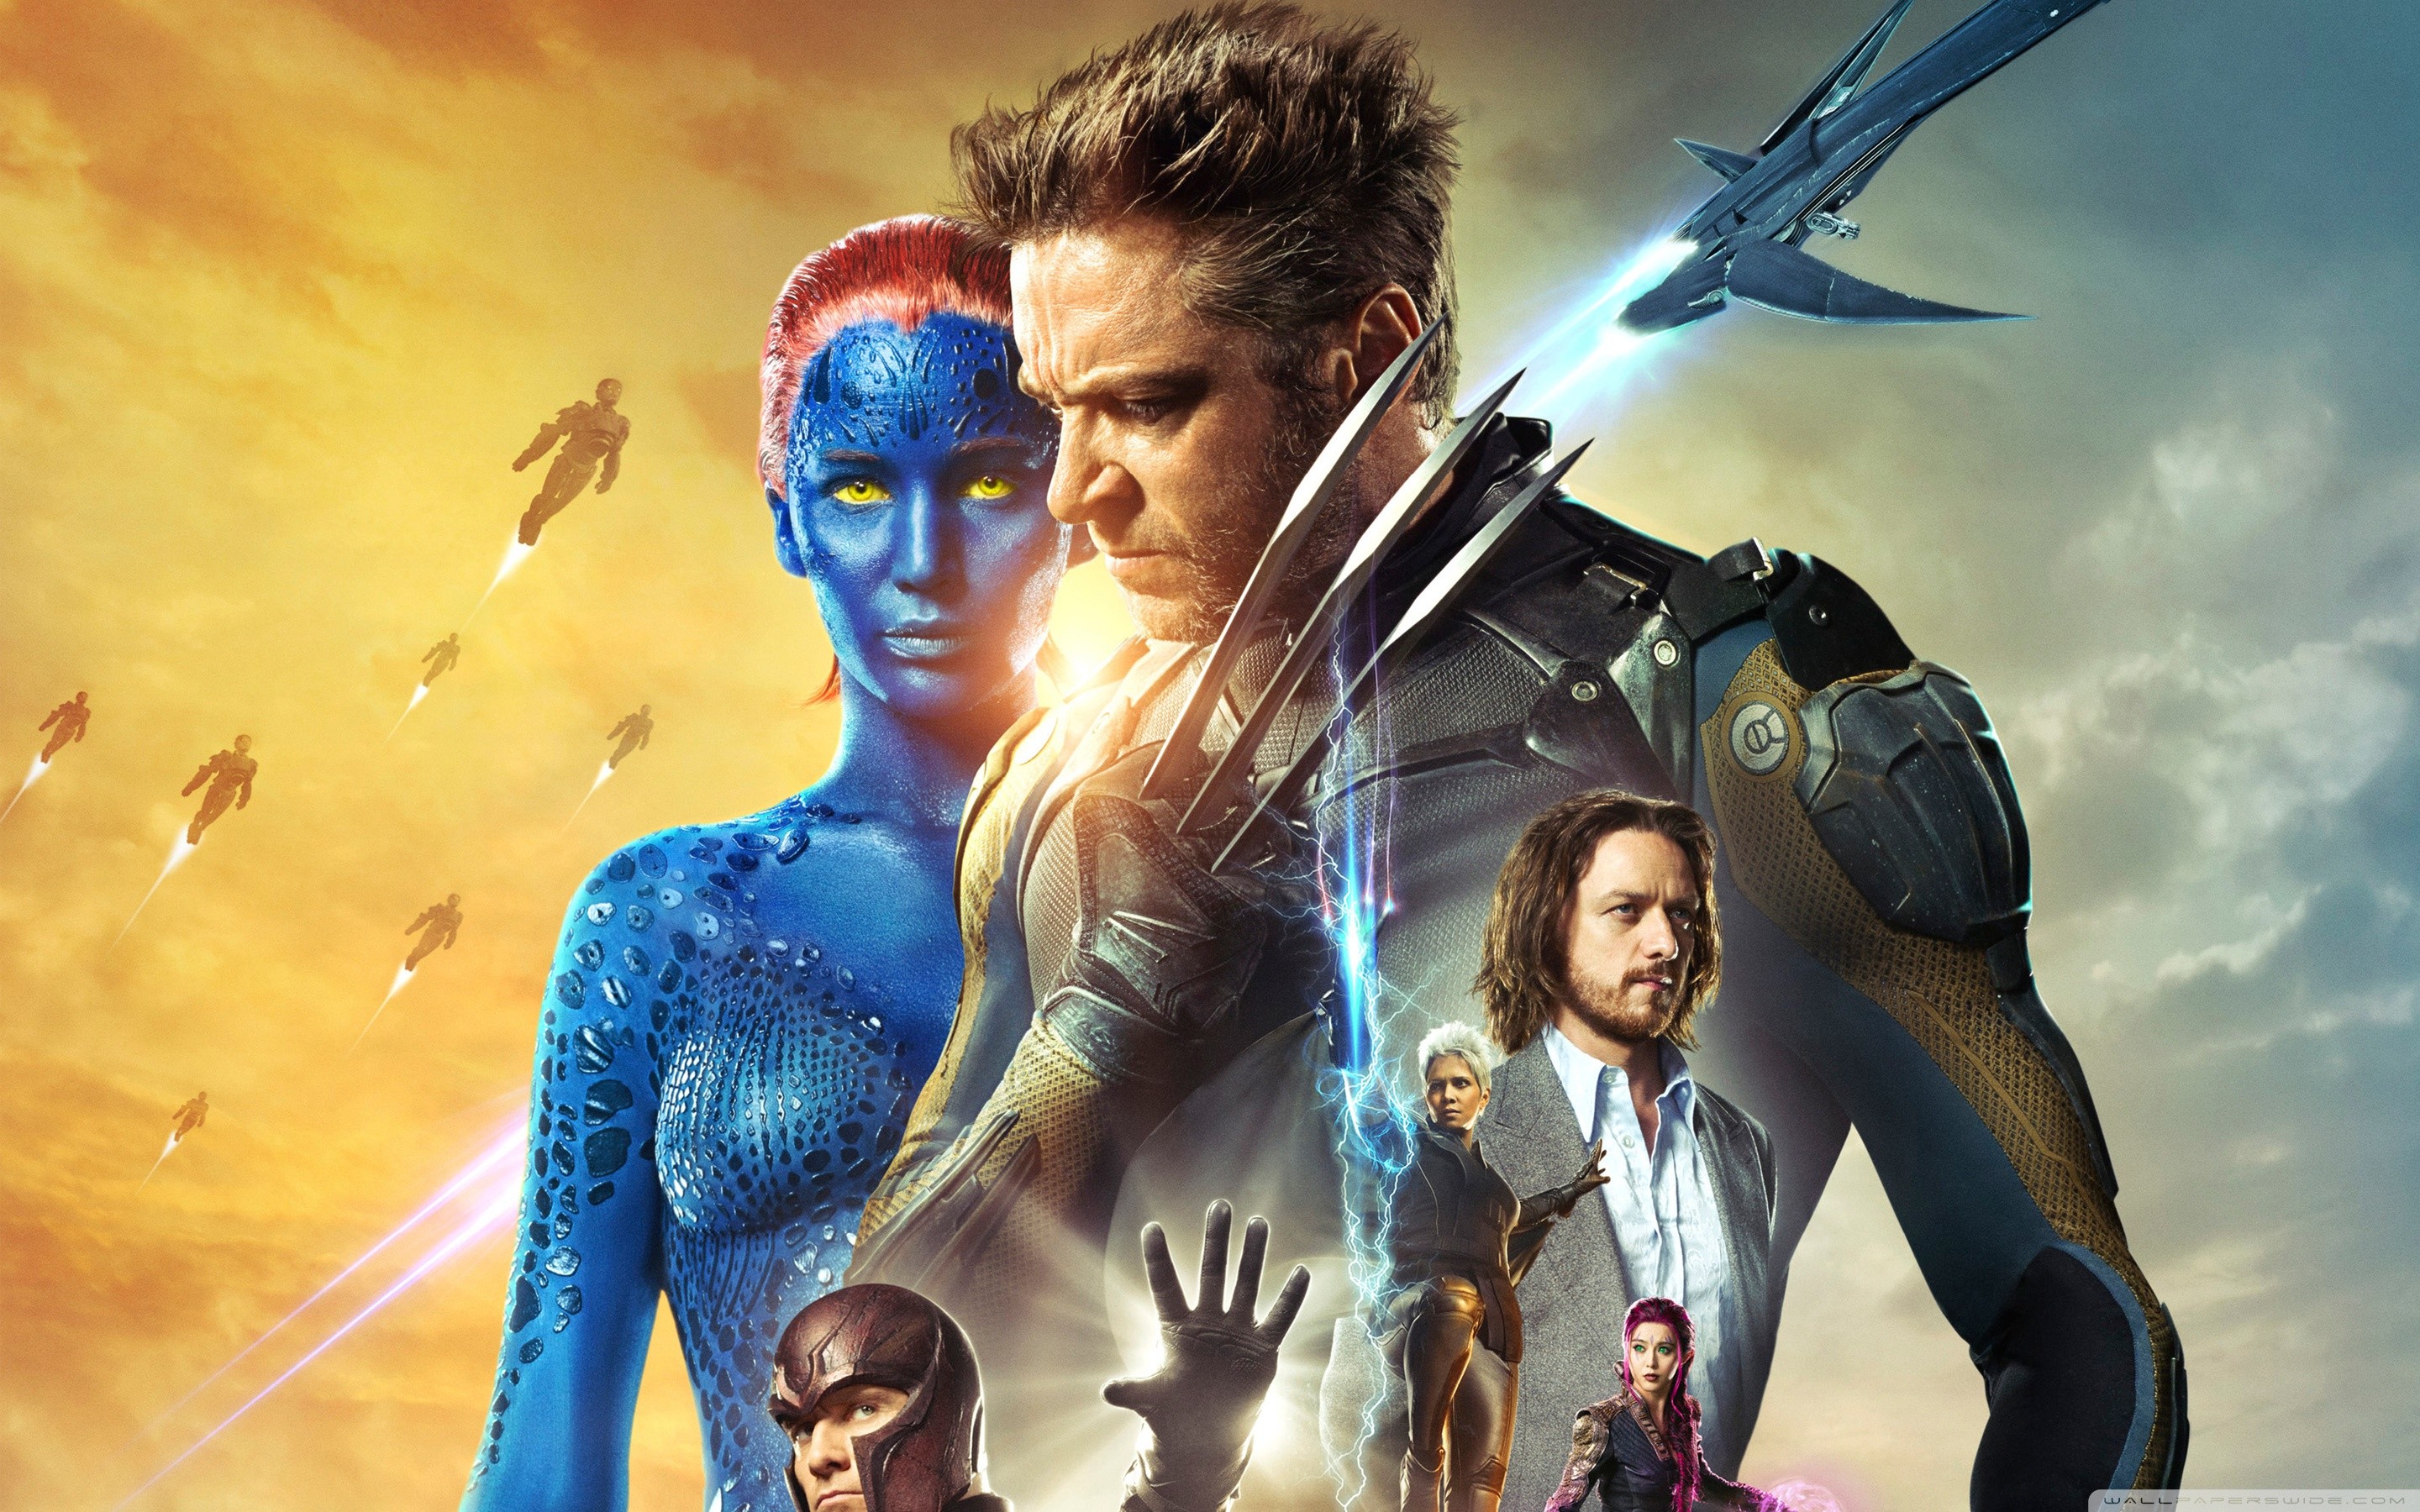 X Men Days of Future Past 2014 HD Wide Wallpaper for Widescreen